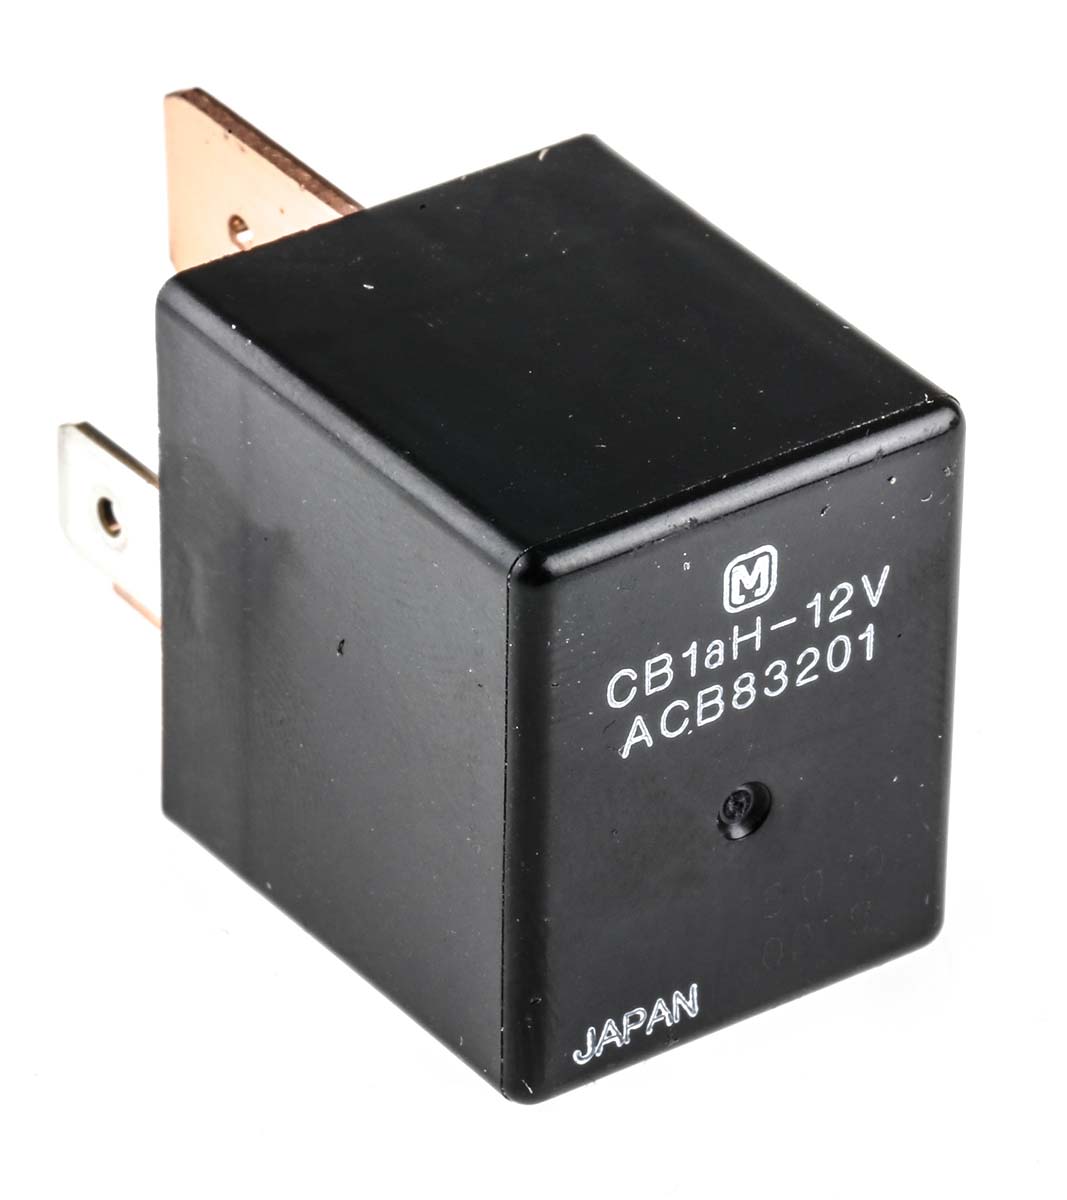 Panasonic Plug In Automotive Relay, 12V dc Coil Voltage, 70A Switching Current, SPST